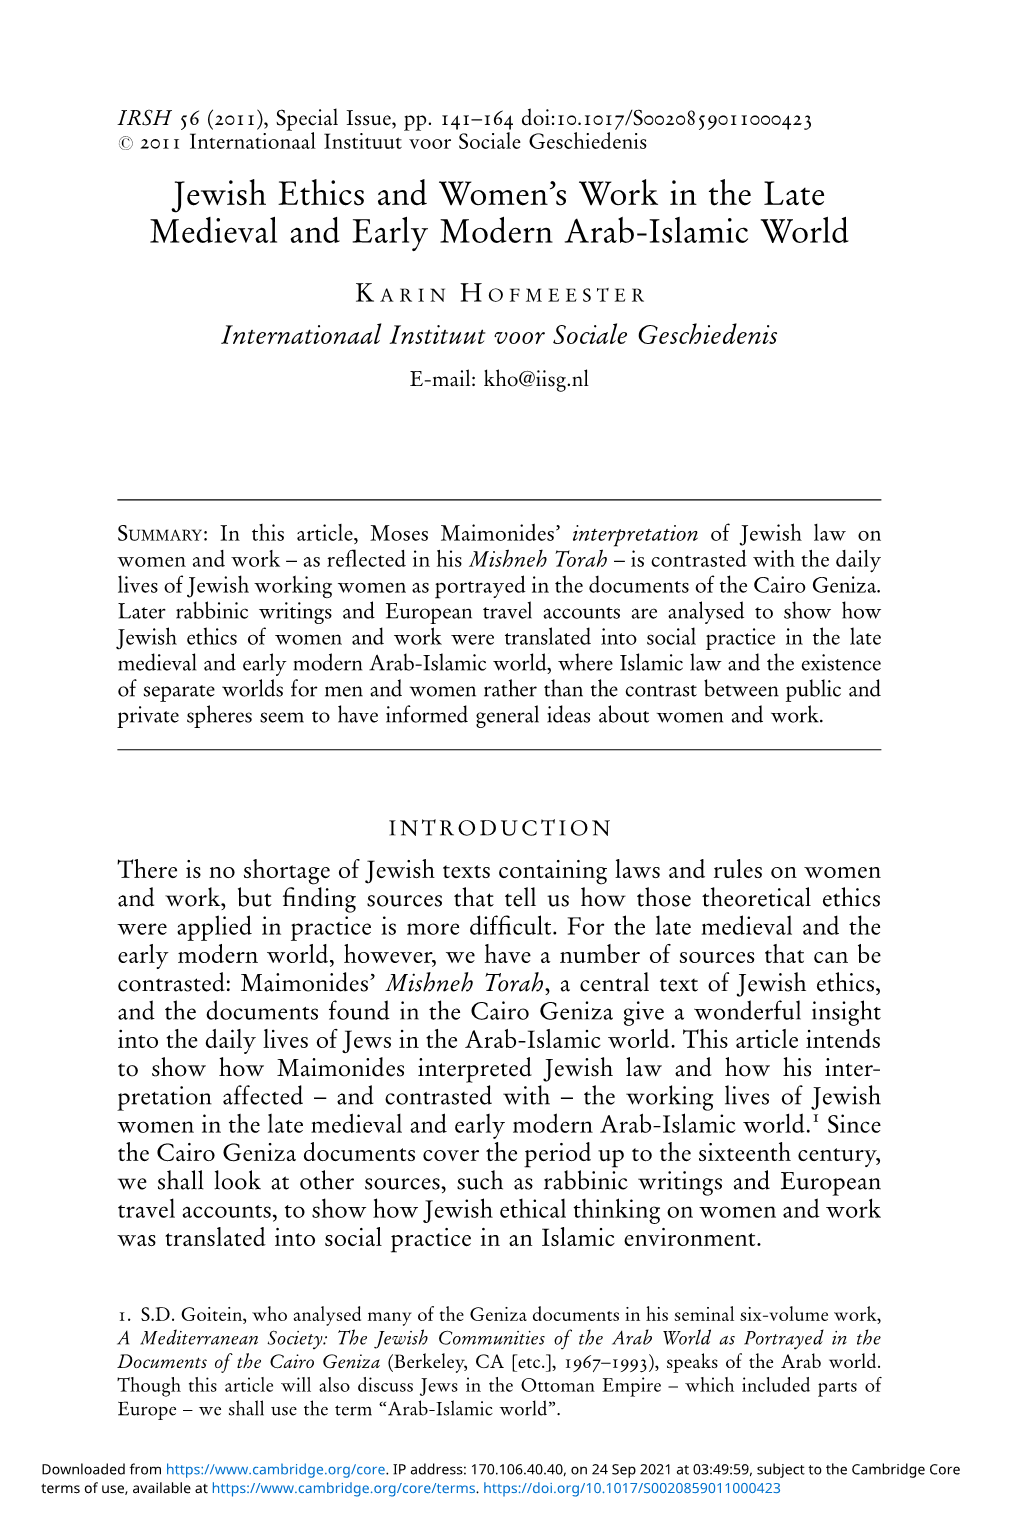 Jewish Ethics and Women's Work in the Late Medieval and Early